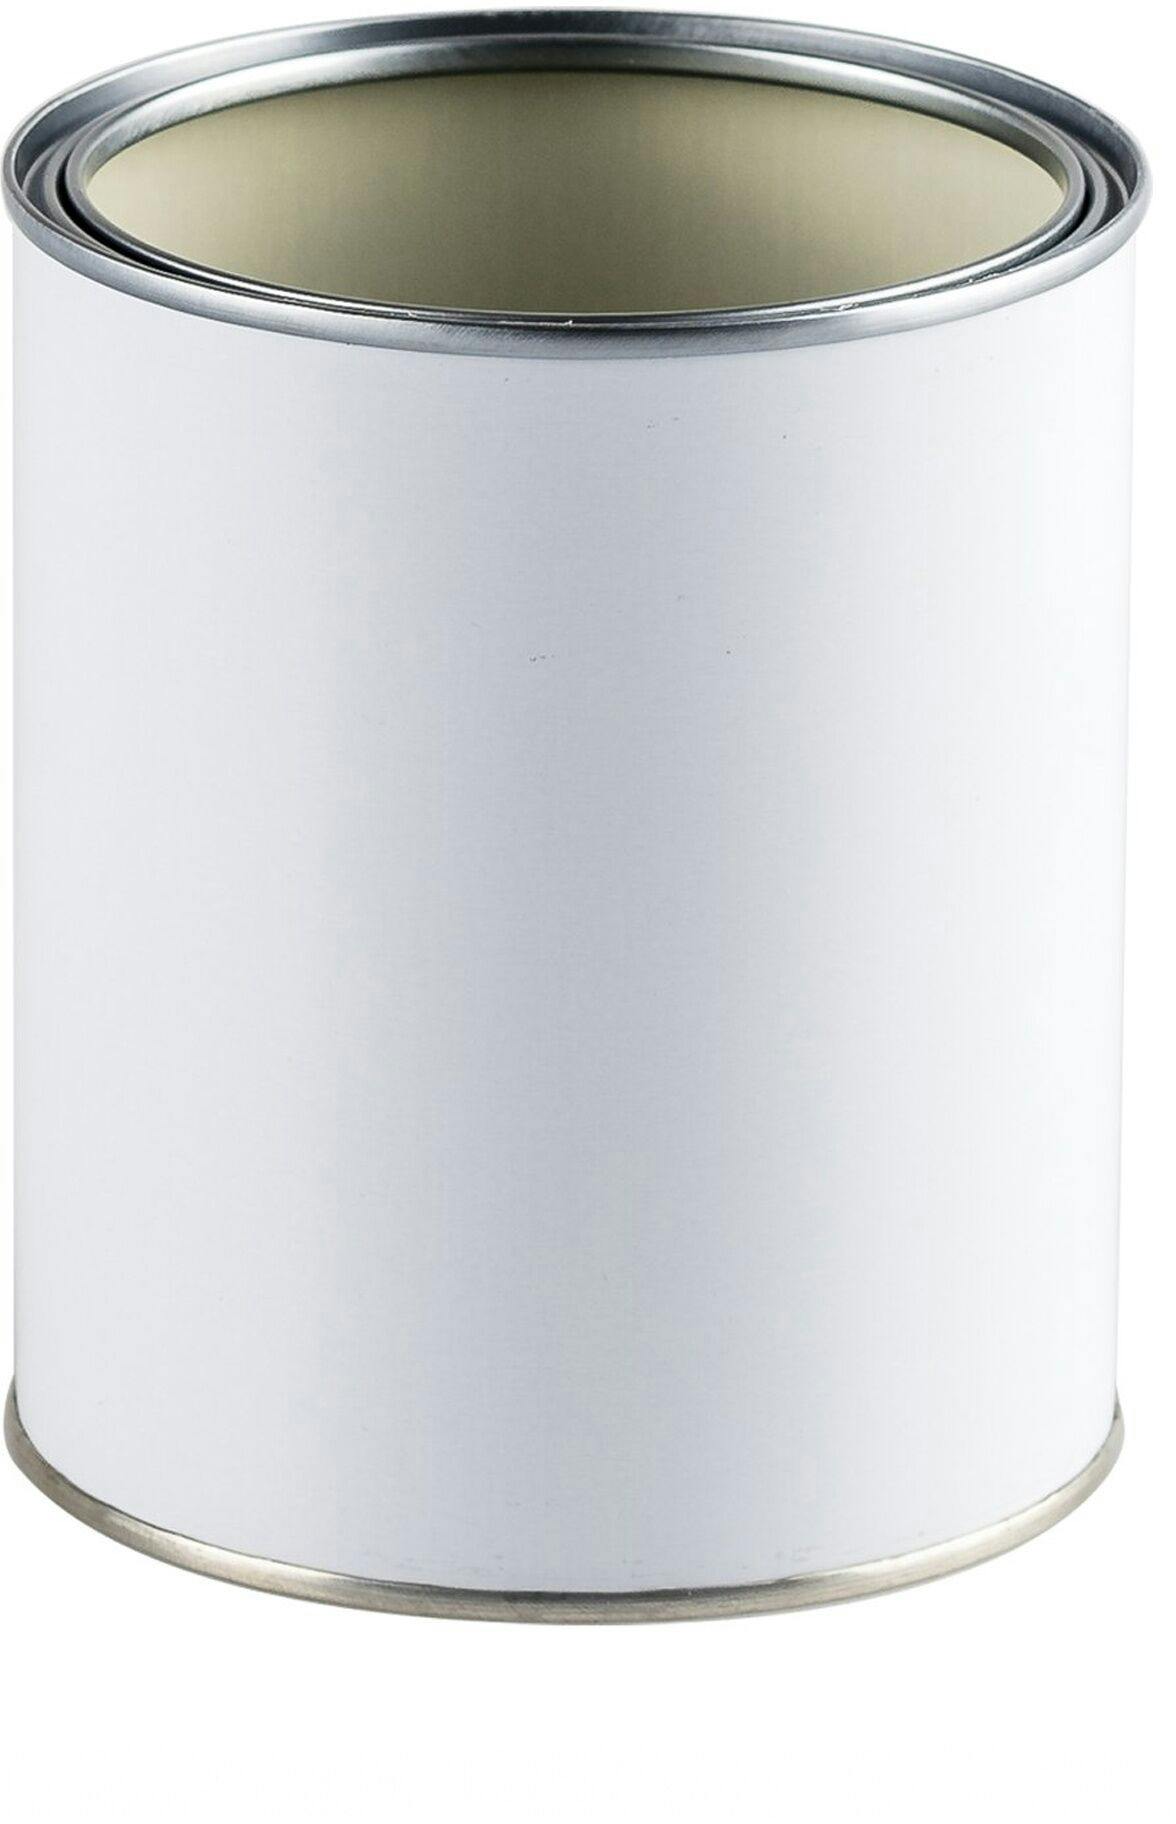 Metal canister 820 ml white D50,8 and 19.05